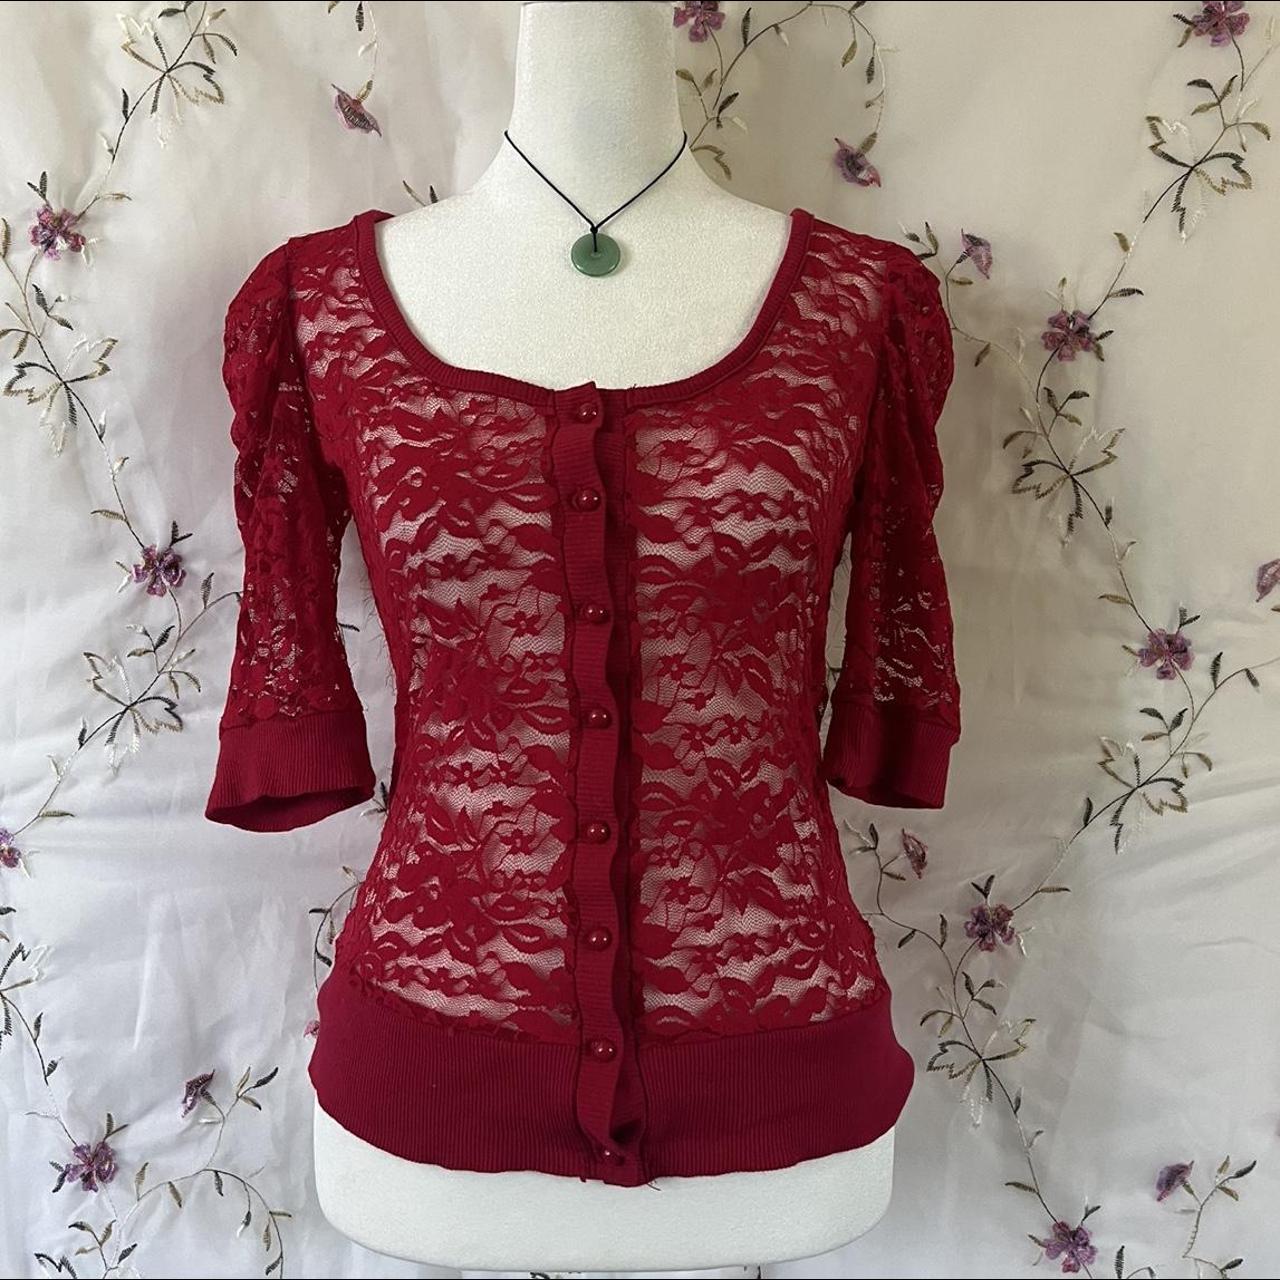 Lace red top best fits a small/medium - Depop